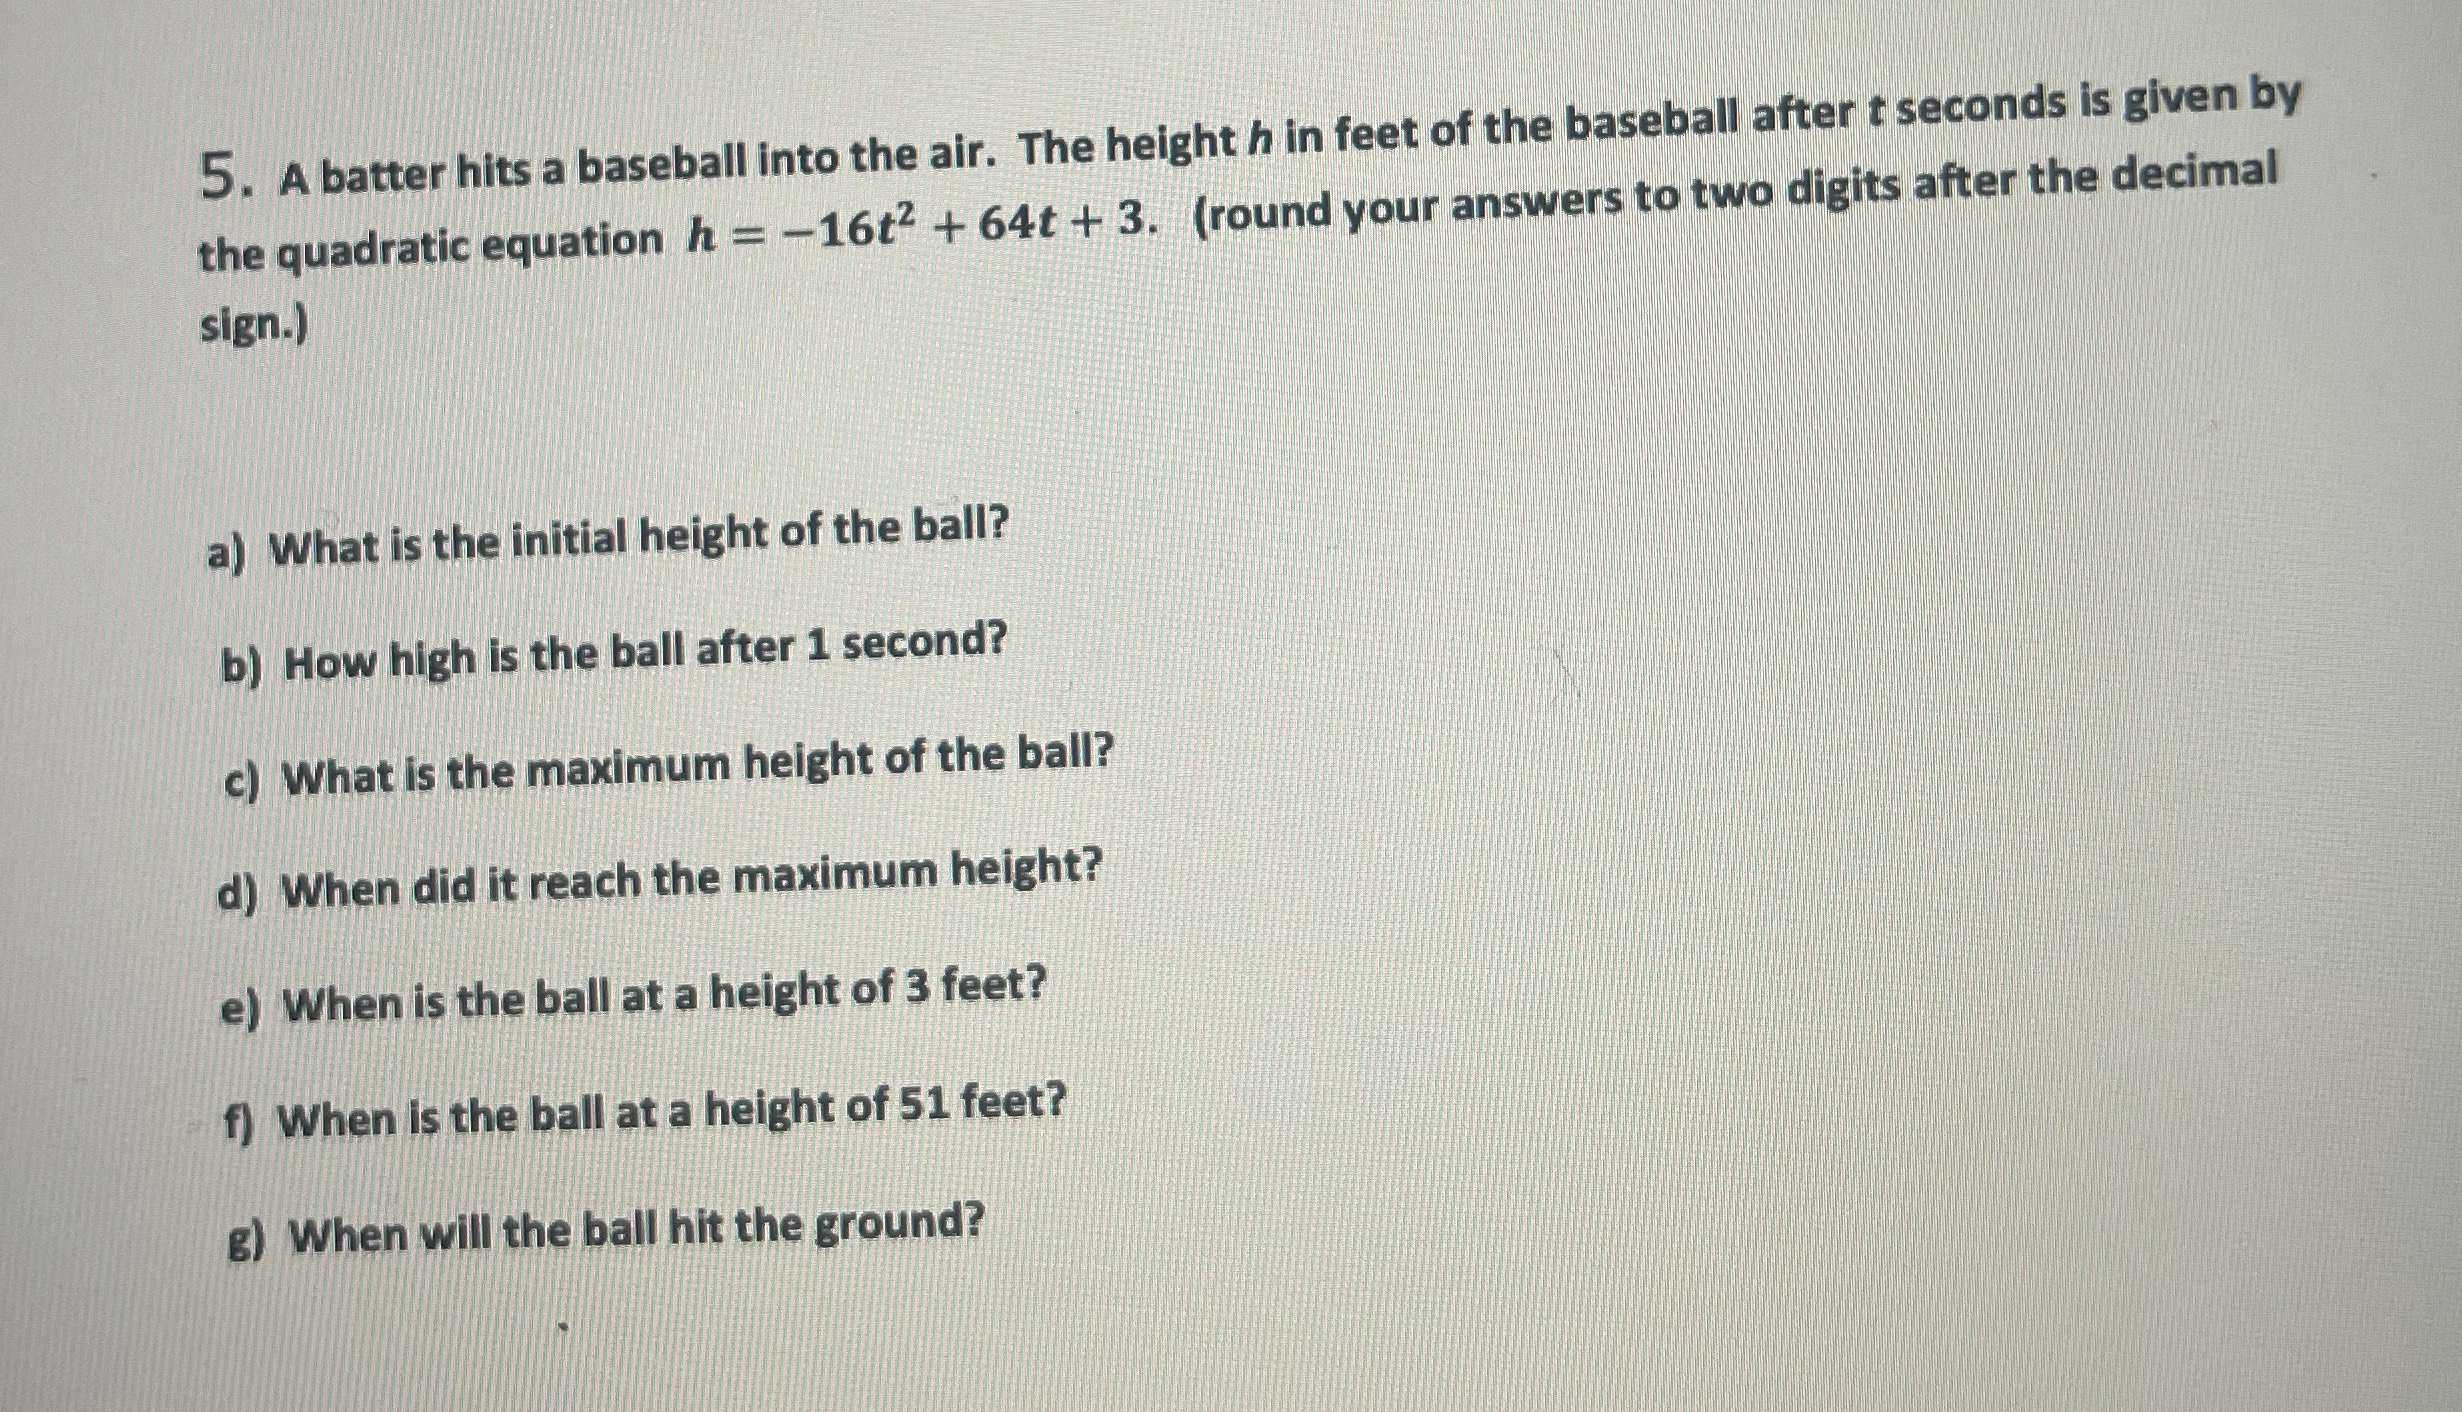 A batter hits a baseball into the air. The height ...